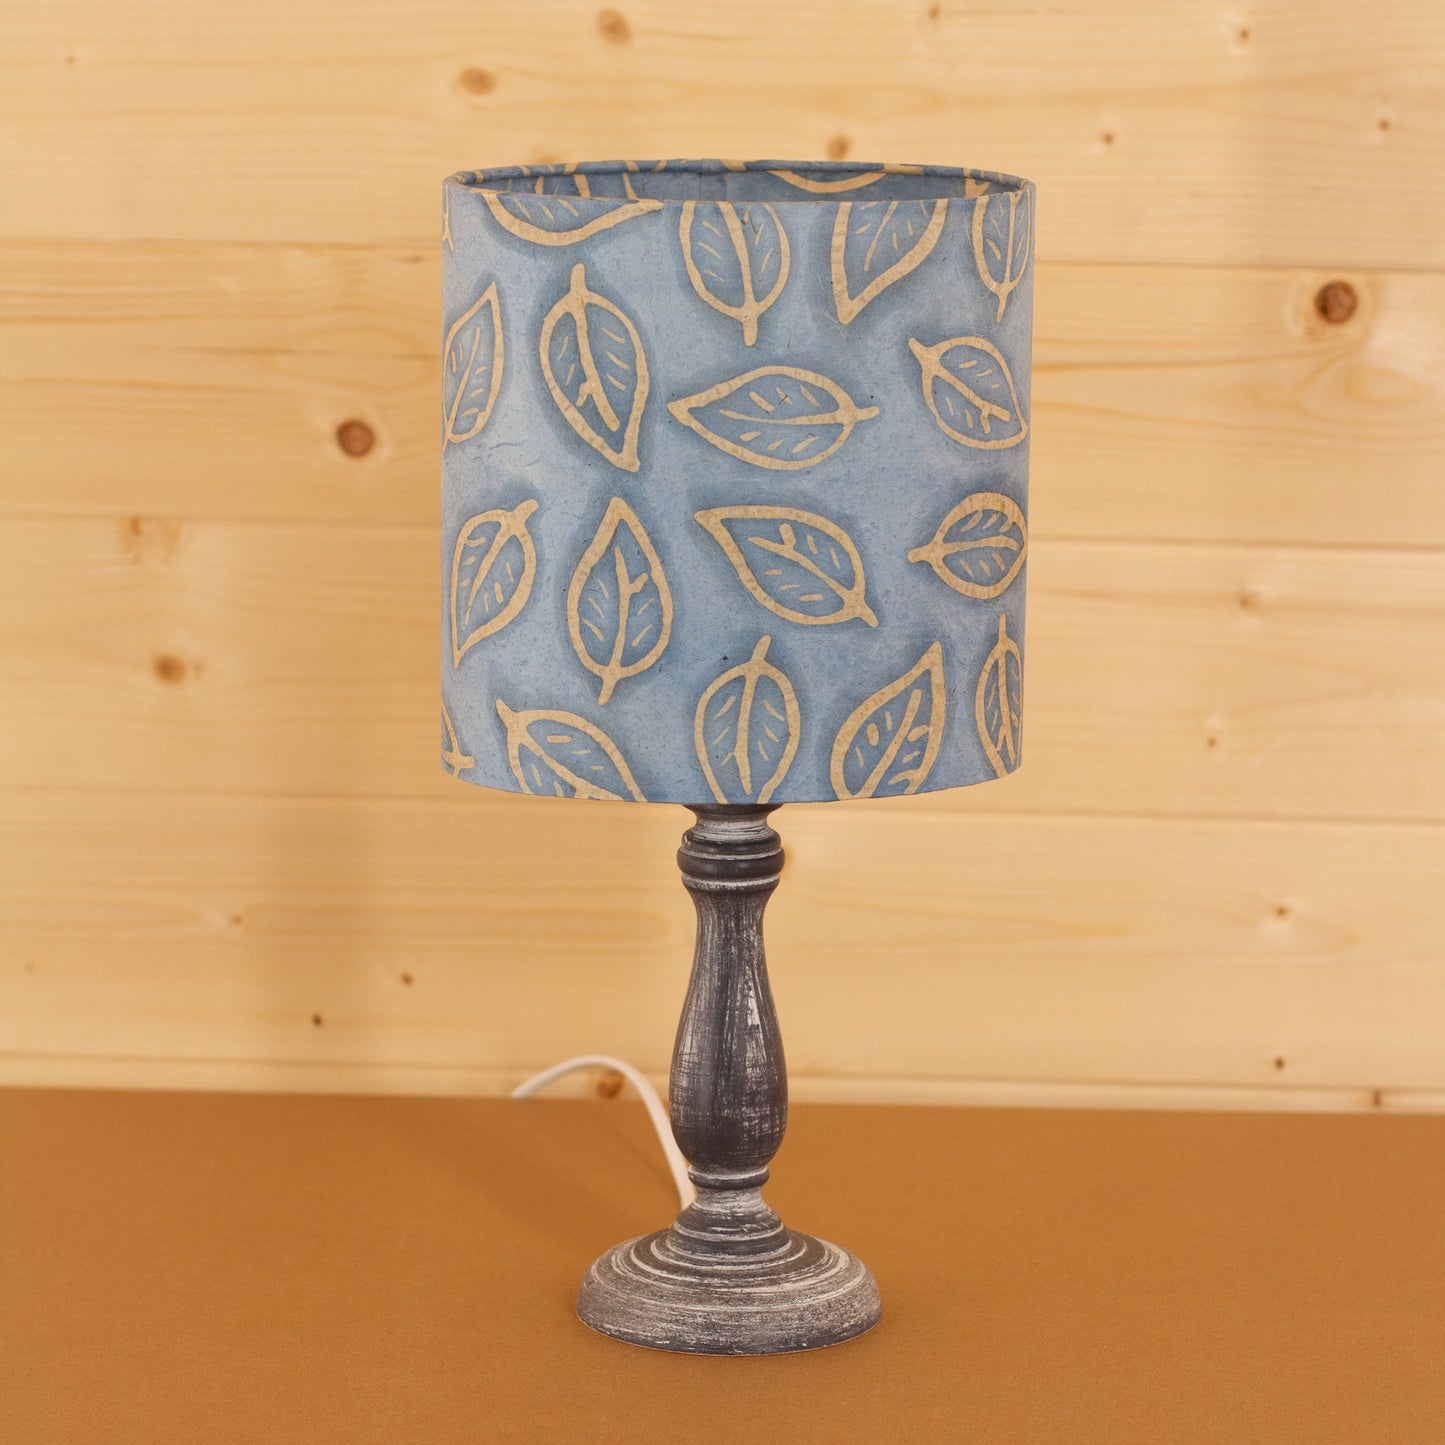 Paros Wooden Table Lamp with a Oval Shade in P31 ~ Batik Leaf on Blue